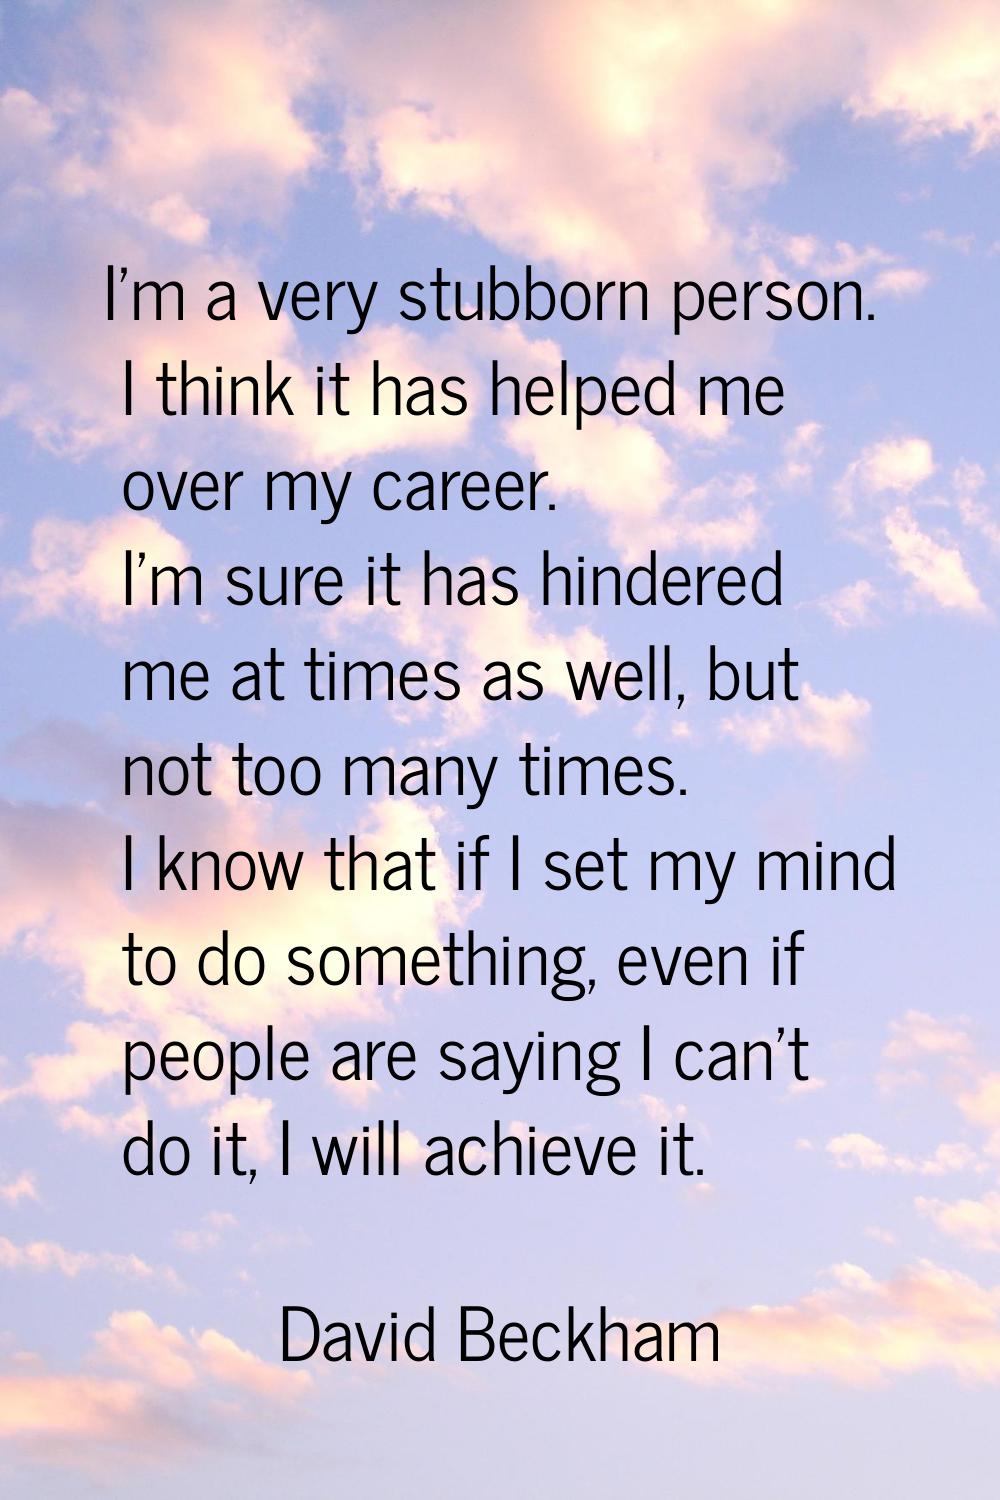 I'm a very stubborn person. I think it has helped me over my career. I'm sure it has hindered me at